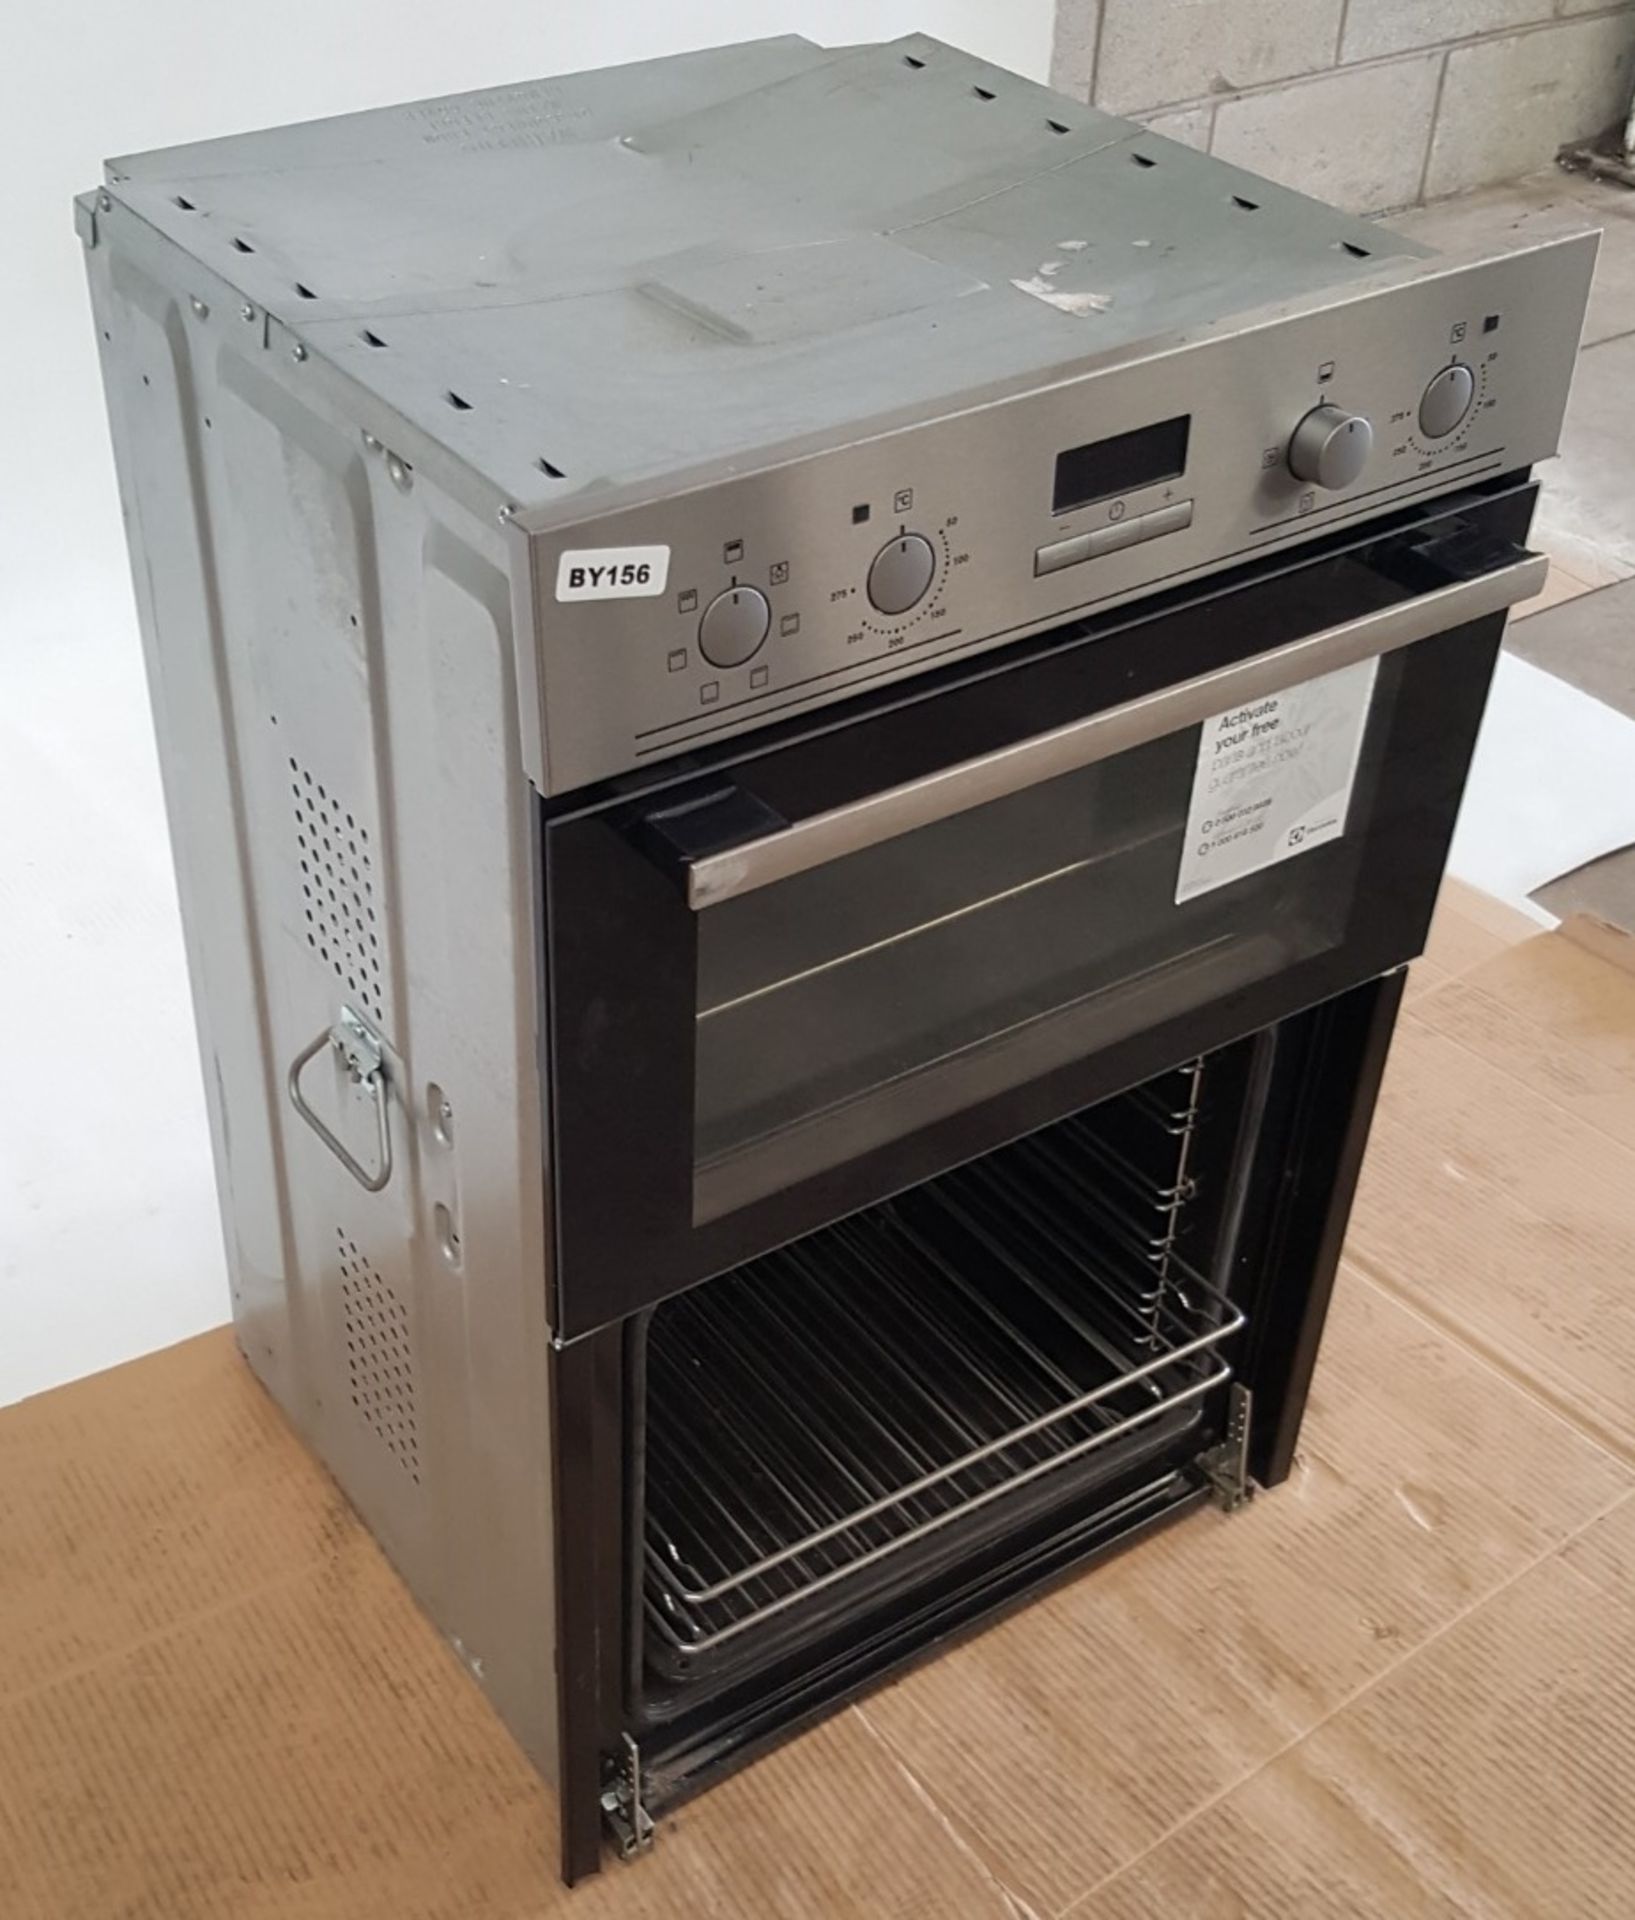 1 x Electrolux EOD3410AOX Built In Double Electric Oven Stainless Steel - Ref BY156 - Image 3 of 6